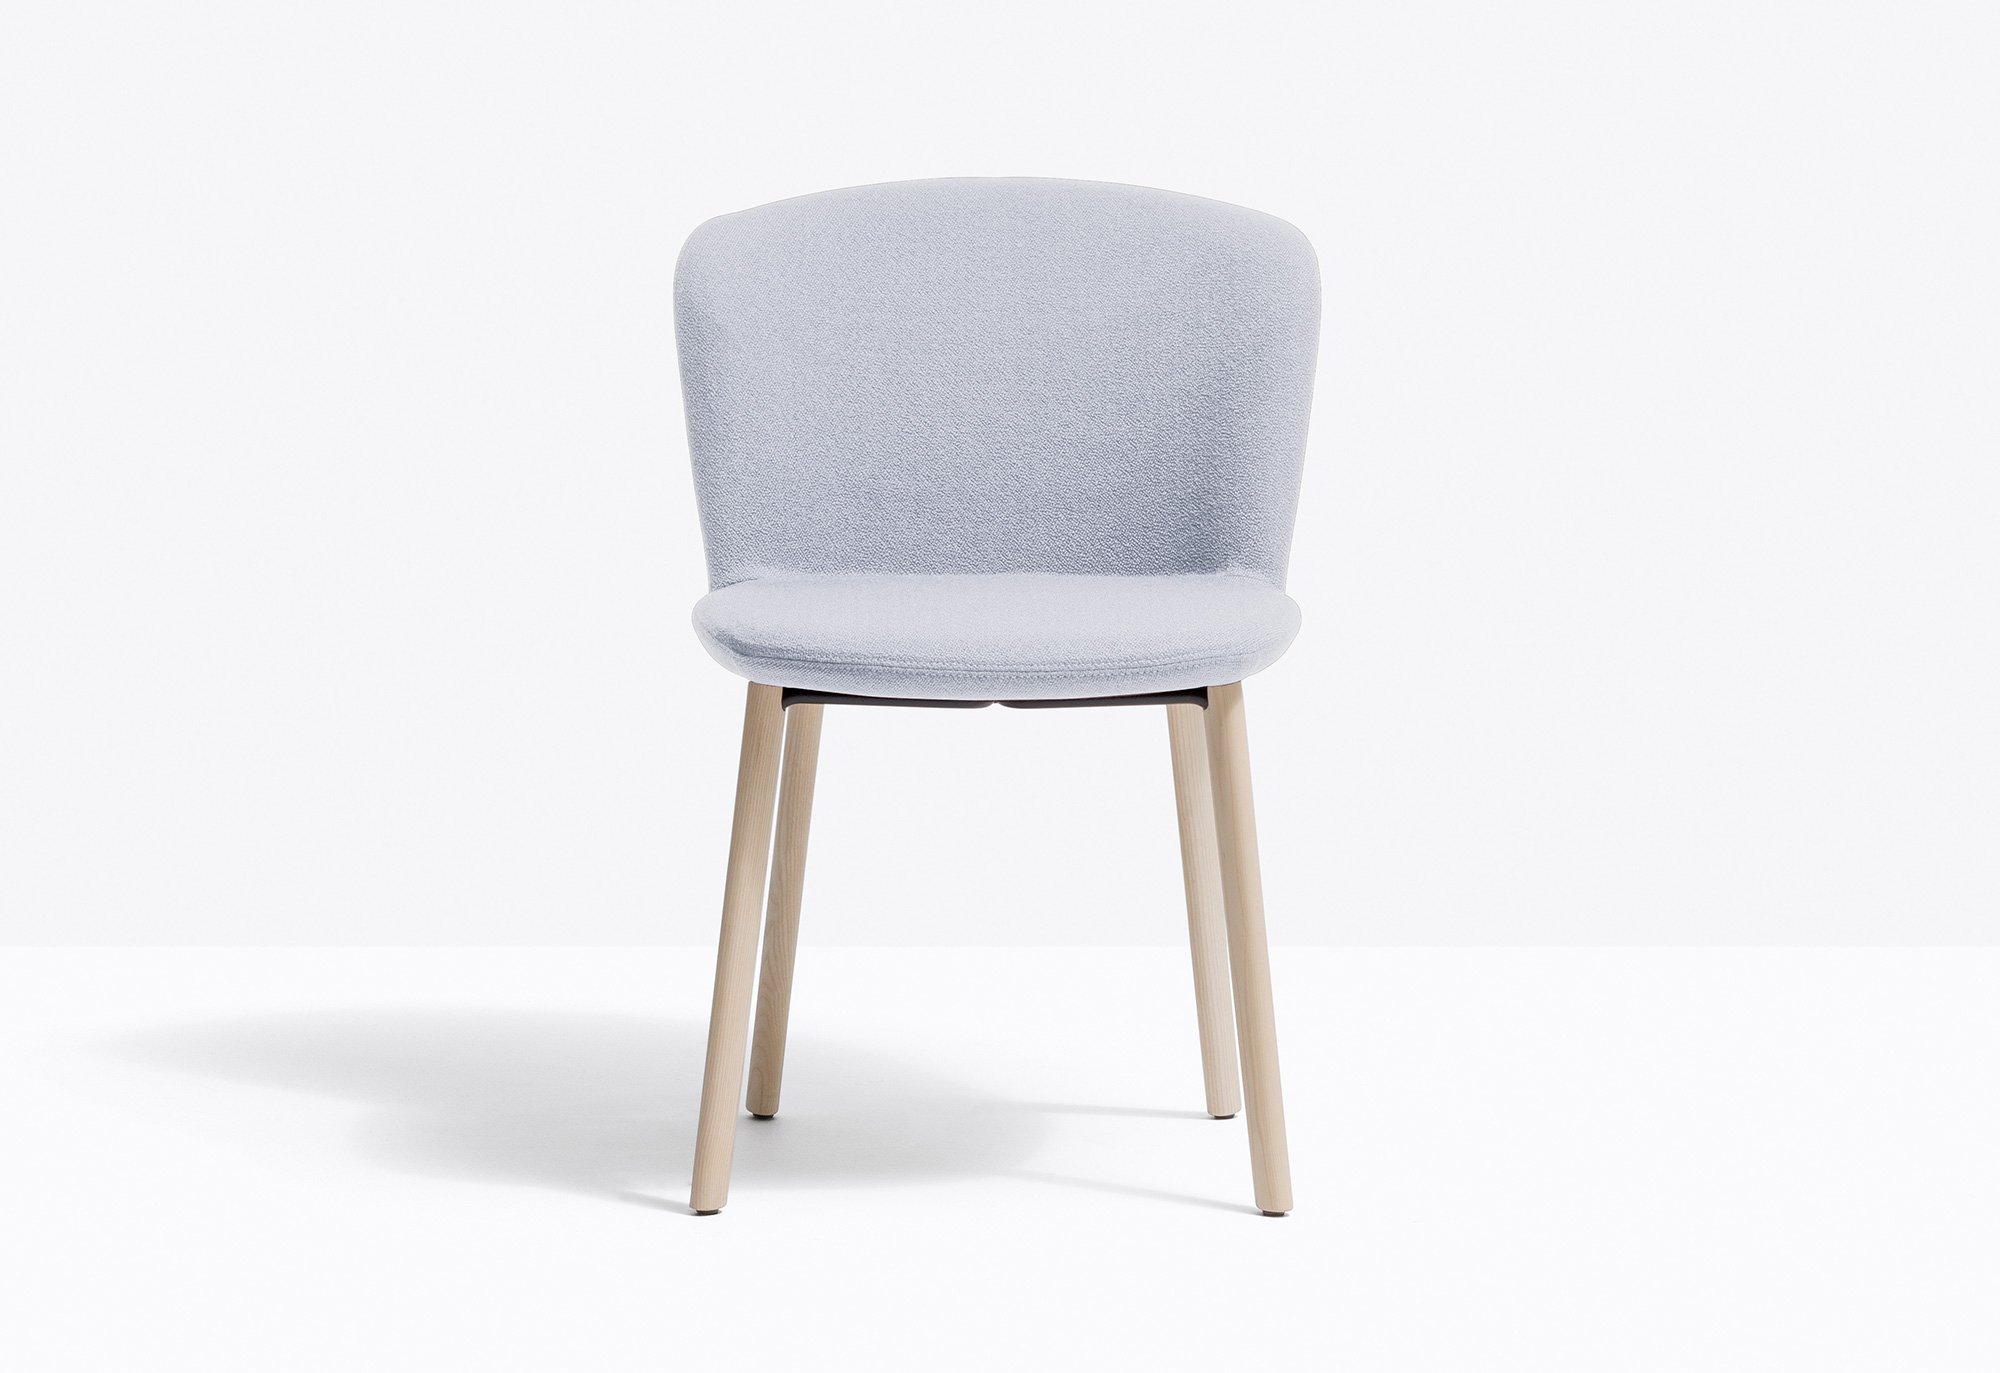 NYM Soft Chair from Pedrali, designed by CMP Design